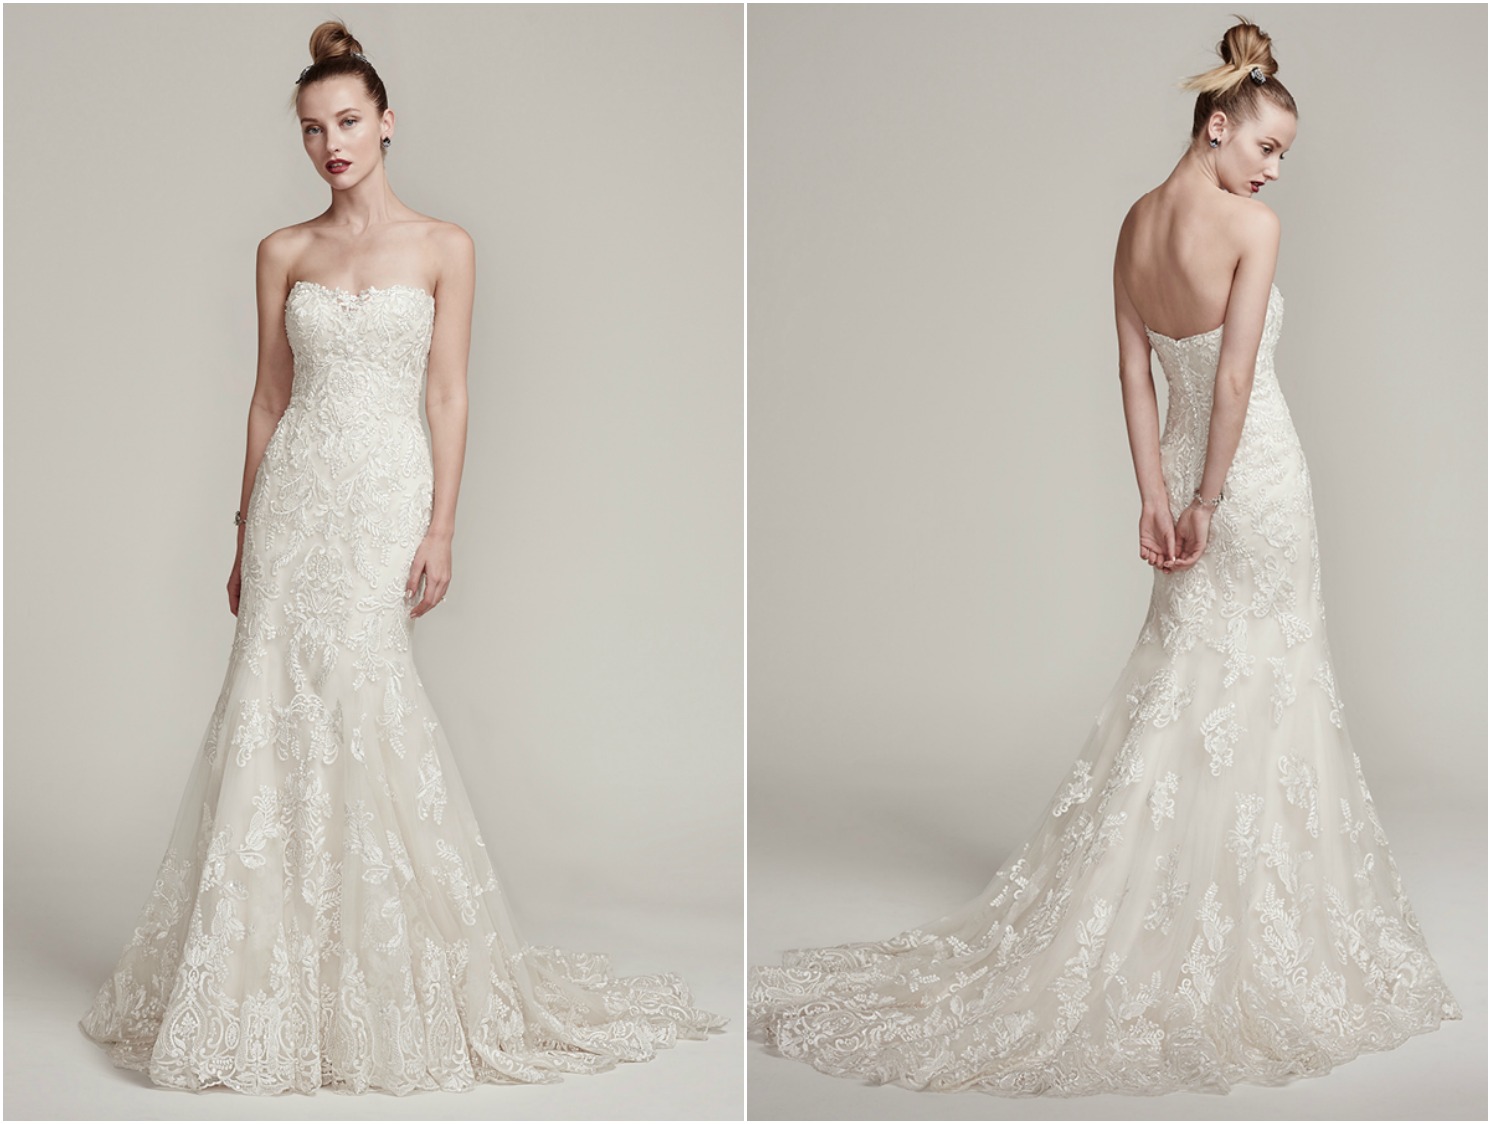 Exquisite embroidered lace covers this sophisticated fit and flare wedding dress, embellished with Swarovski crystals and beads. Complete with an illusion sweetheart neckline and scalloped lace hemline flowing into an elegant train. Finished with crystal buttons over zipper and inner corset closure. 

<a href="https://www.maggiesottero.com/sottero-and-midgley/tessa/9886" target="_blank">Sottero &amp; Midgley</a>